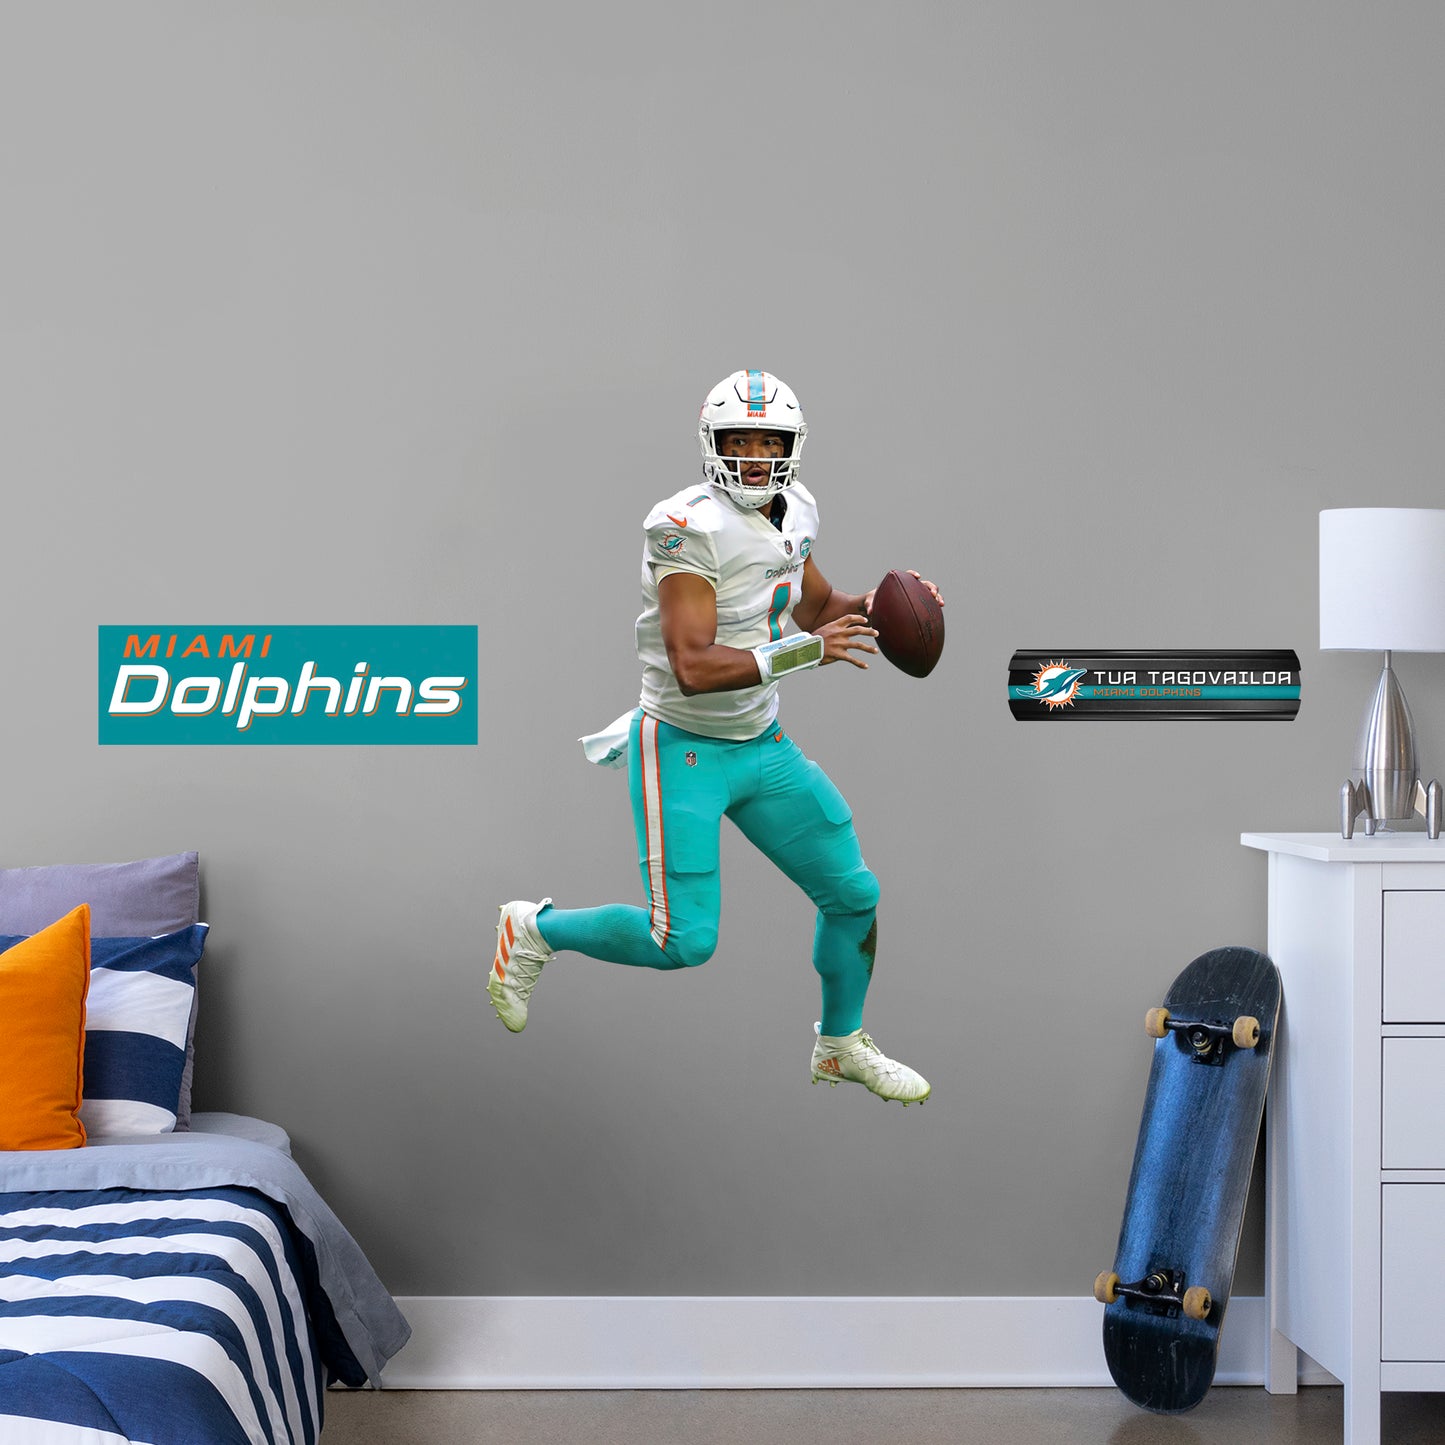 Miami Dolphins: Tua Tagovailoa         - Officially Licensed NFL Removable Wall   Adhesive Decal